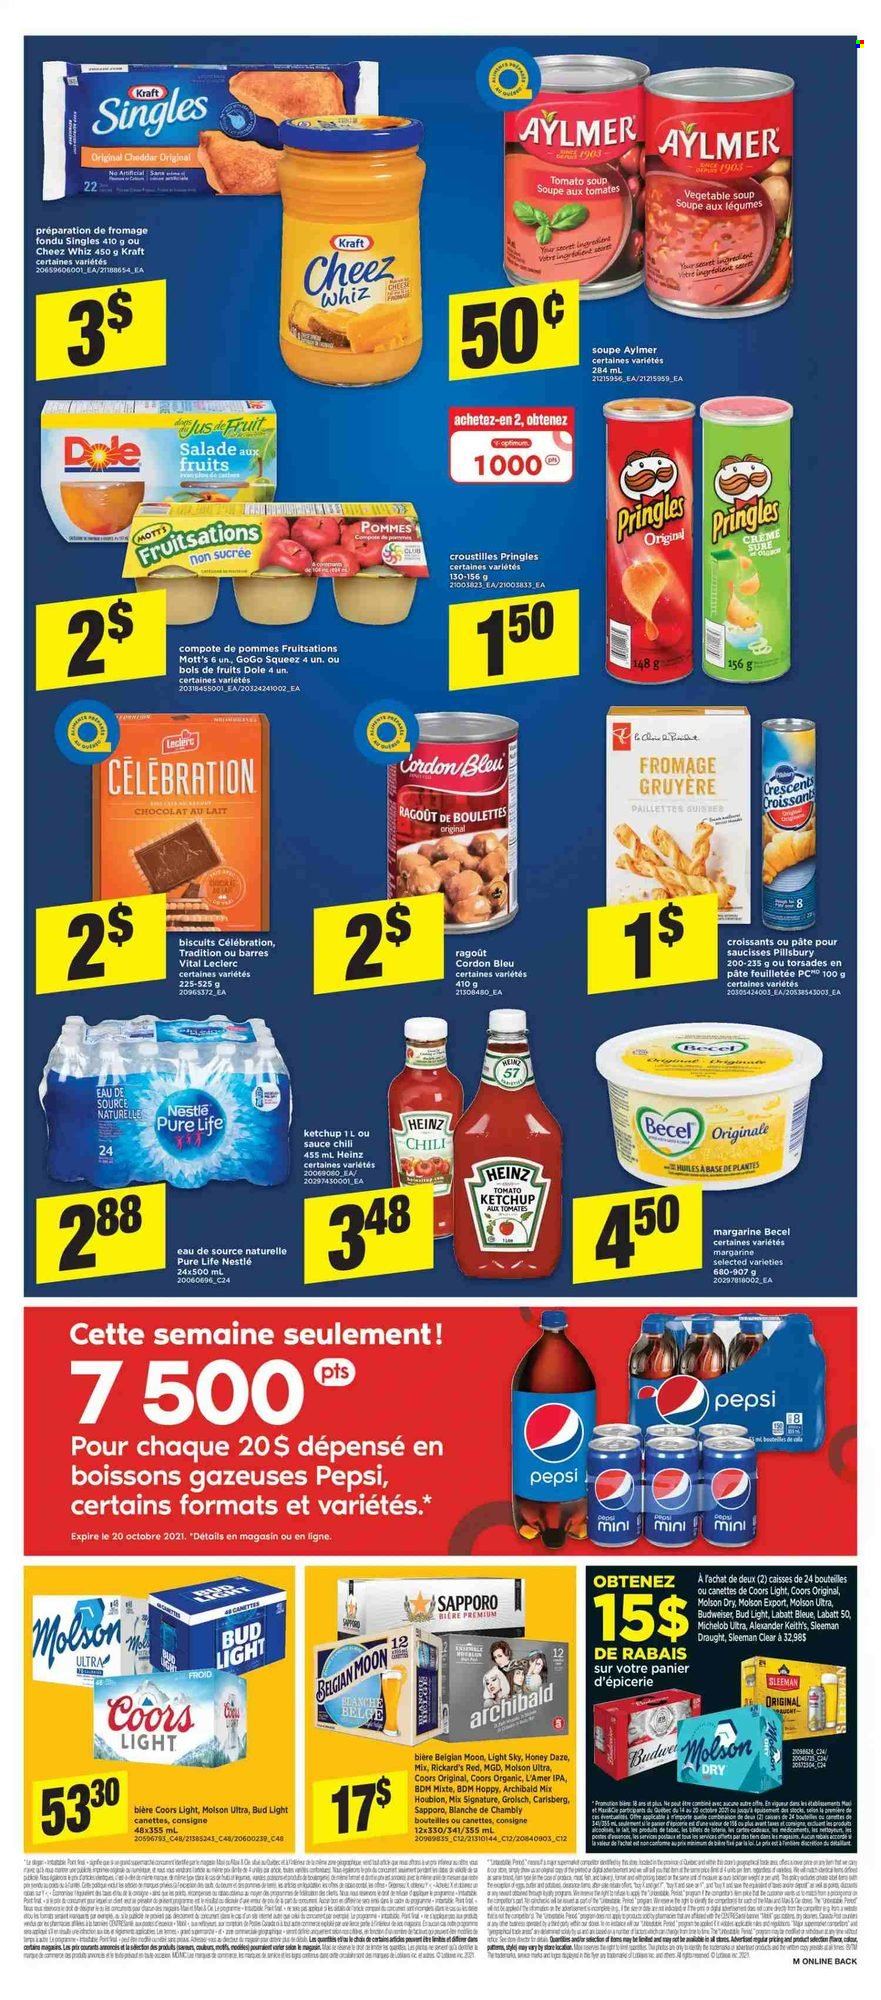 thumbnail - Maxi Flyer - October 14, 2021 - October 20, 2021 - Sales products - croissant, Dole, Mott's, tomato soup, vegetable soup, soup, sauce, Pillsbury, Kraft®, Gruyere, sandwich slices, cheddar, cheese, Kraft Singles, margarine, Celebration, biscuit, Pringles, Heinz, compote, honey, Pepsi, beer, Bud Light, Grolsch, IPA, Sure, Nestlé, Budweiser, ketchup, cordon bleu, Coors, Michelob. Page 6.